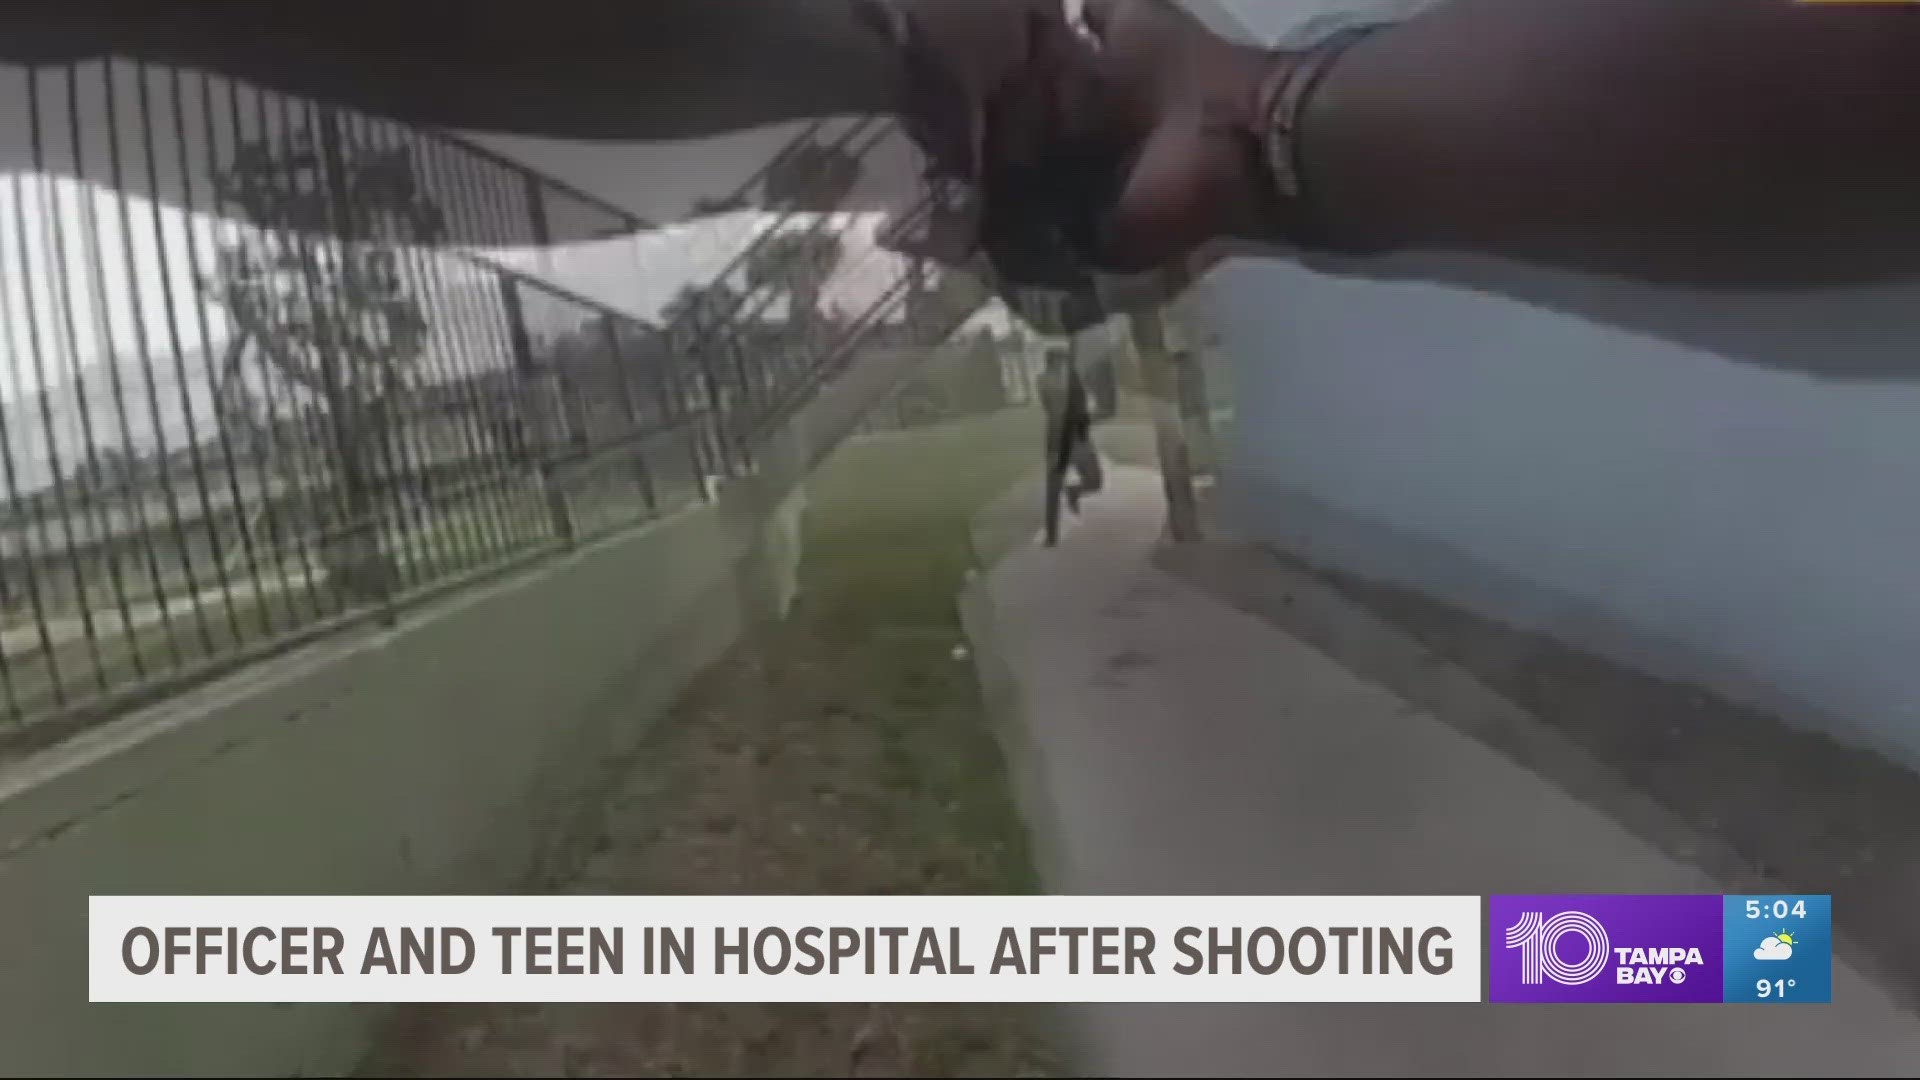 The 13-year-old boy is being monitored by police as he is treated for gunshot wounds to the left thigh and stomach.